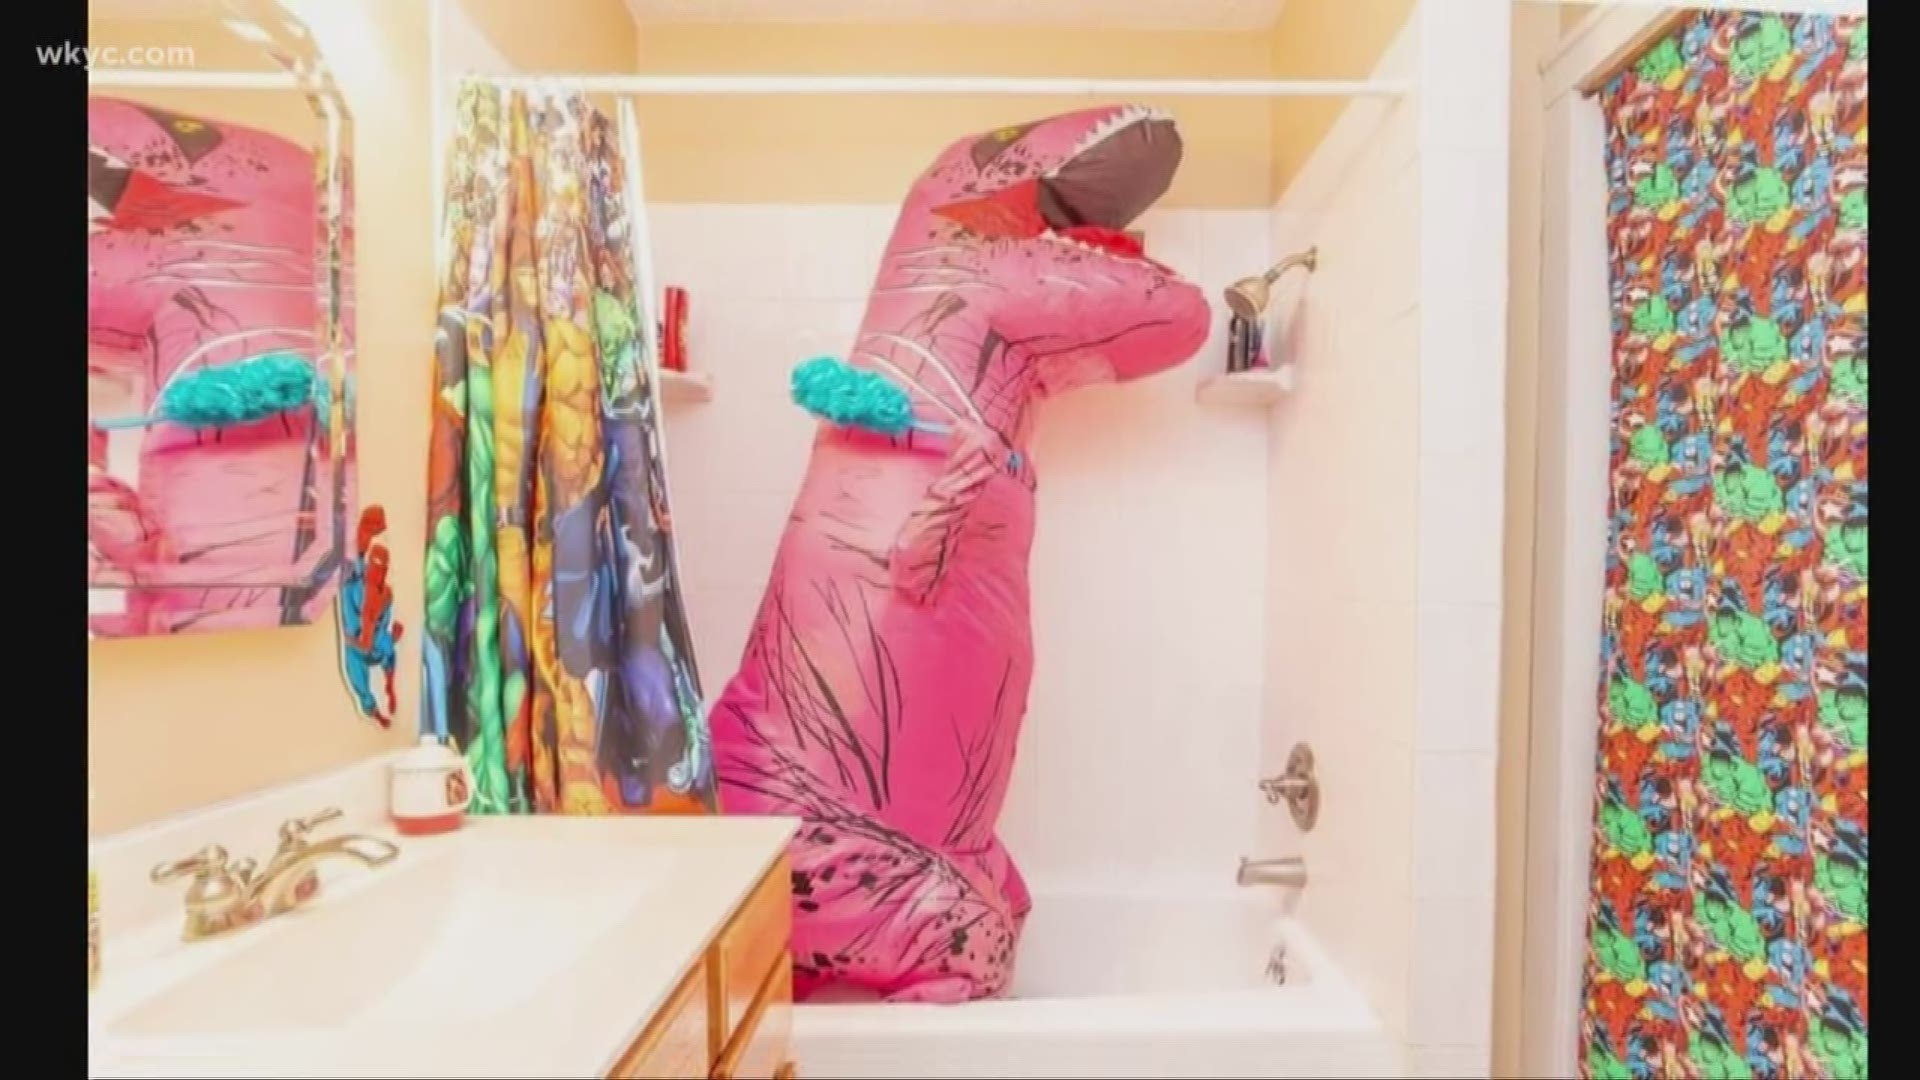 Nov. 9, 2018: This is hilarious! See how a Cleveland couple used an inflatable pink dinosaur costume to get more interest in selling their home.